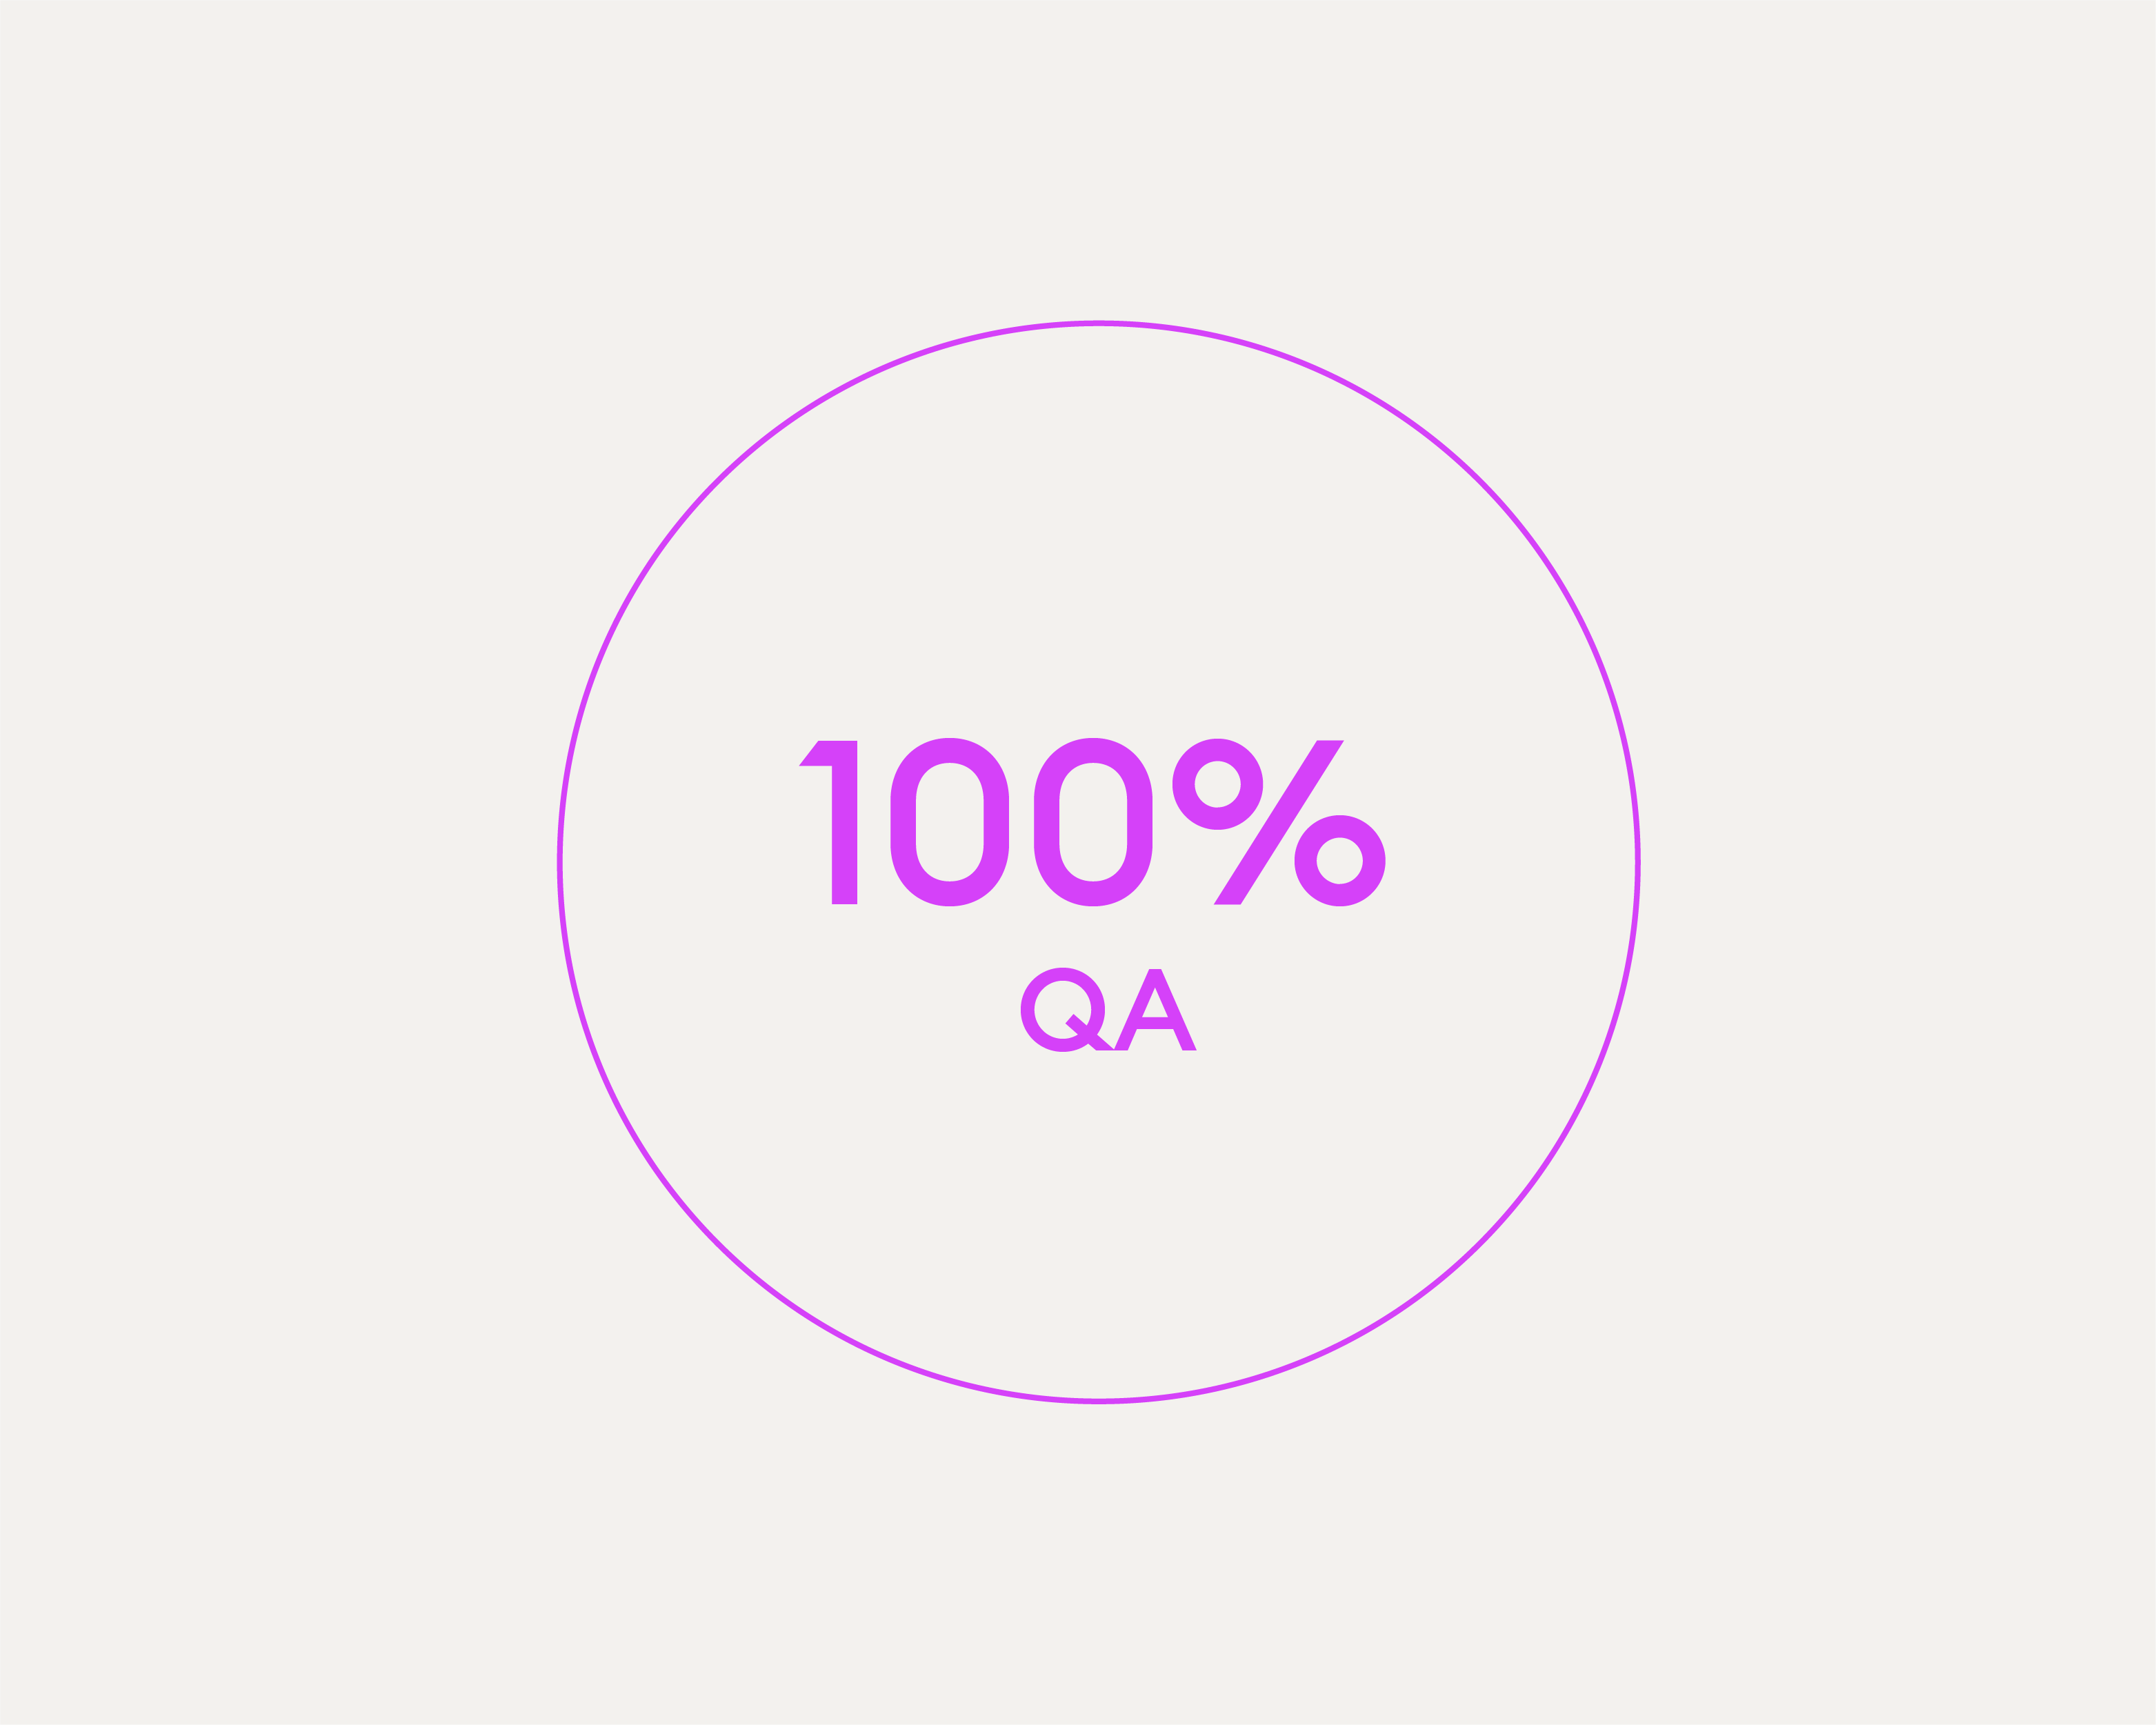 Circular with 100% quality assurance